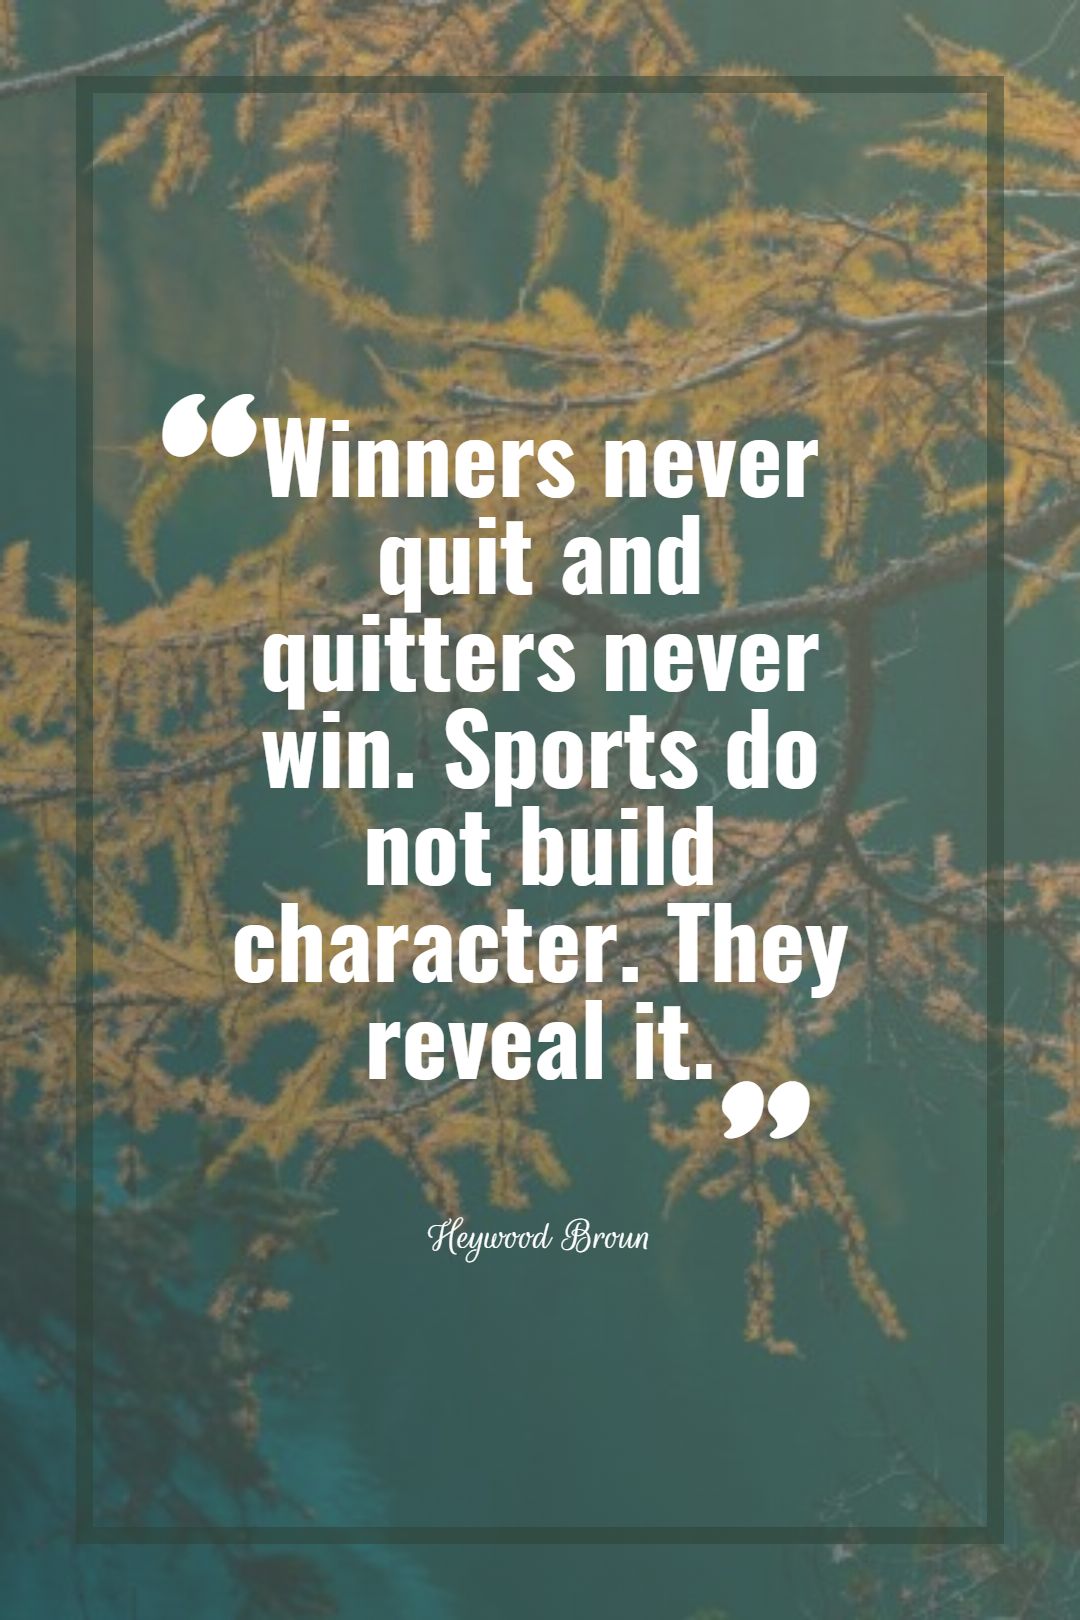 Winners never quit and quitters never win. Sports do not build character. They reveal it.